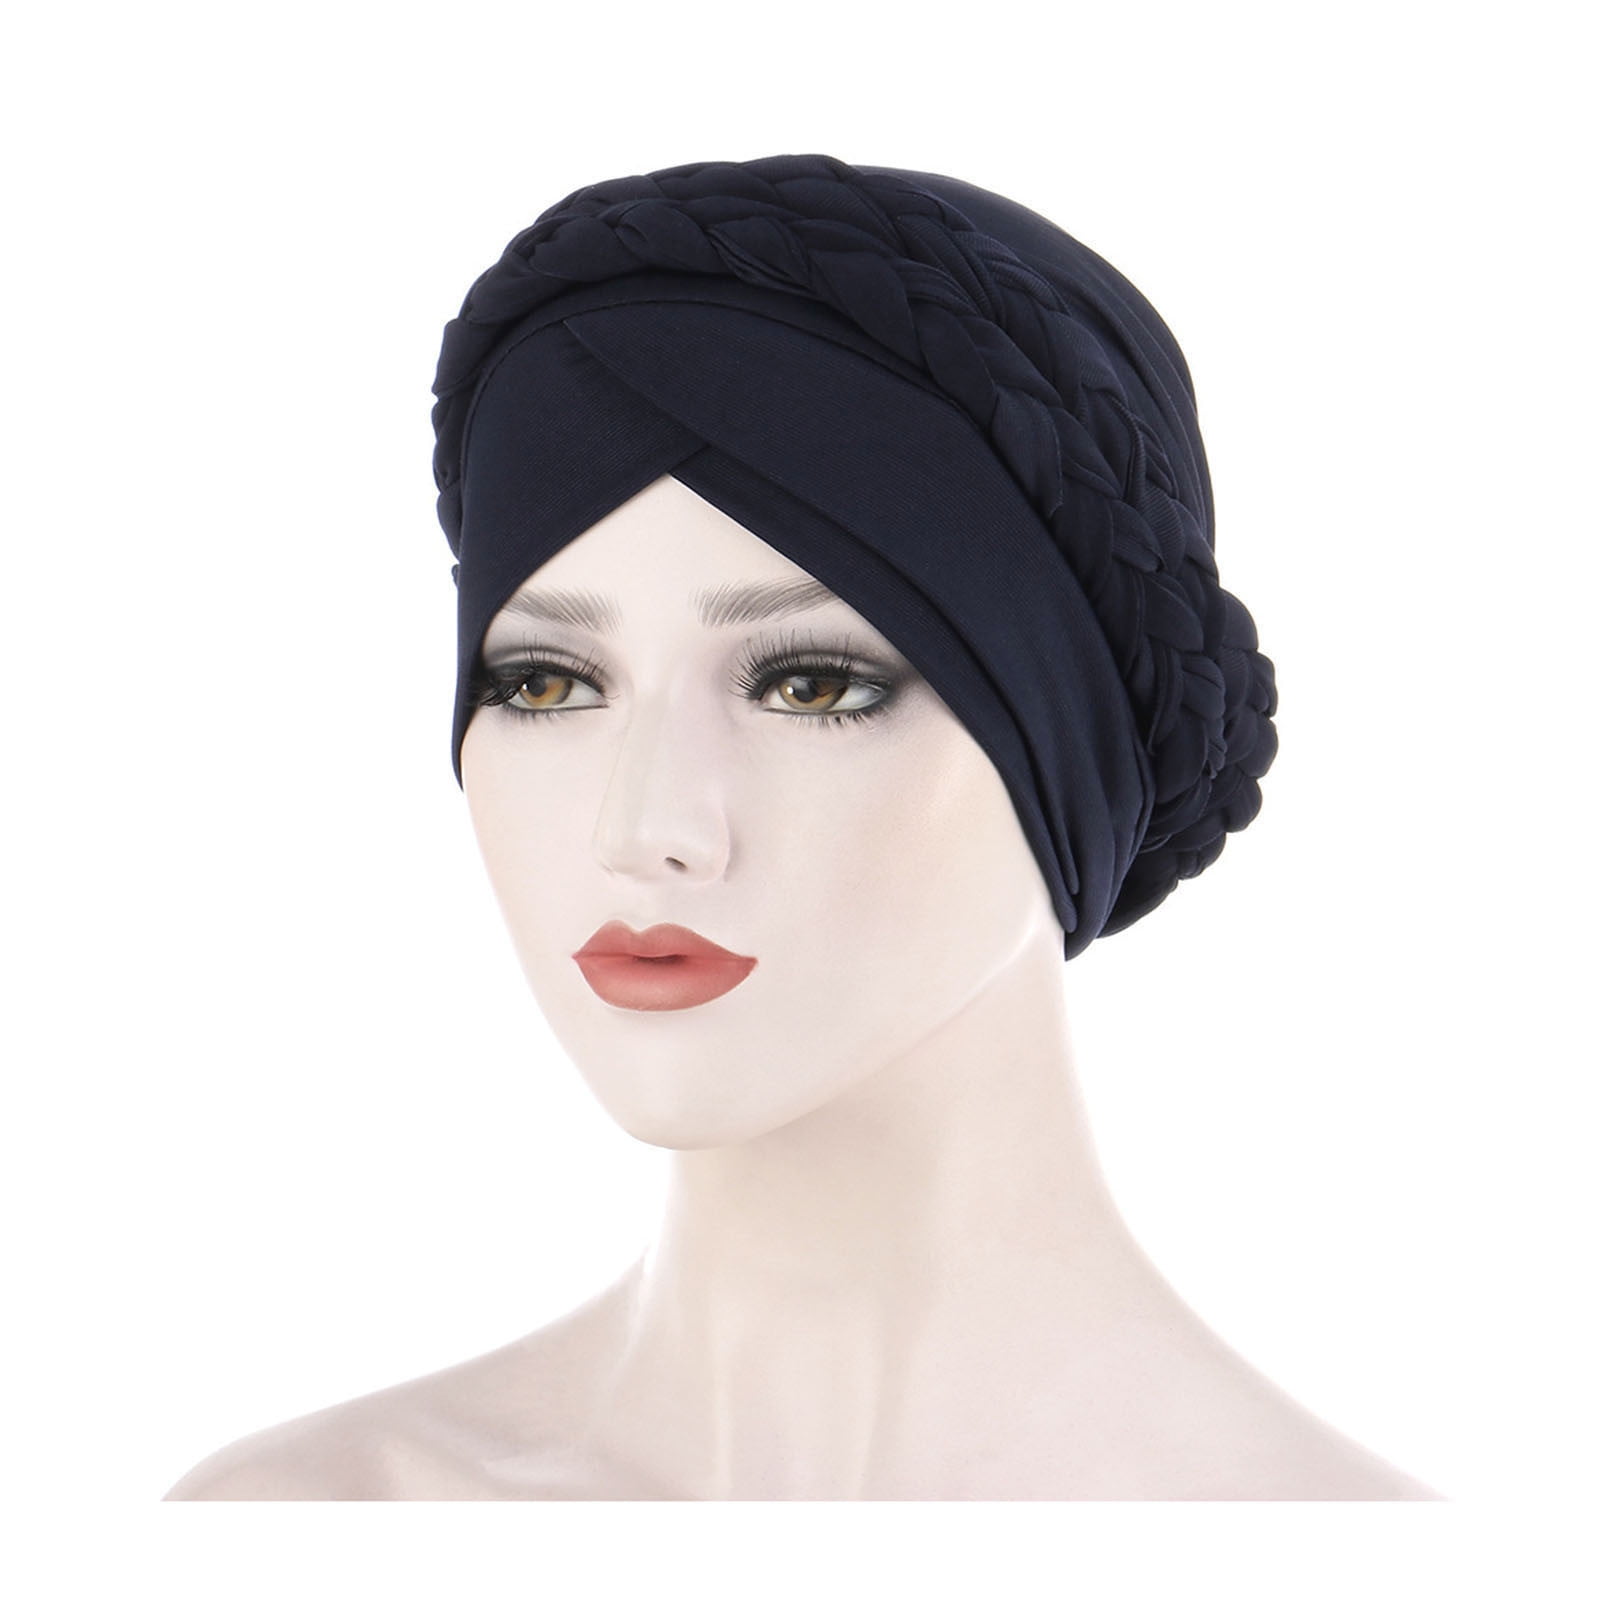 Soild Color Ruffle Head Wrap Hat for Protecting Ears African Women Magic Headwrap DealinM Turban Hat with Buttons Fashion Headwear Gifts for Women 